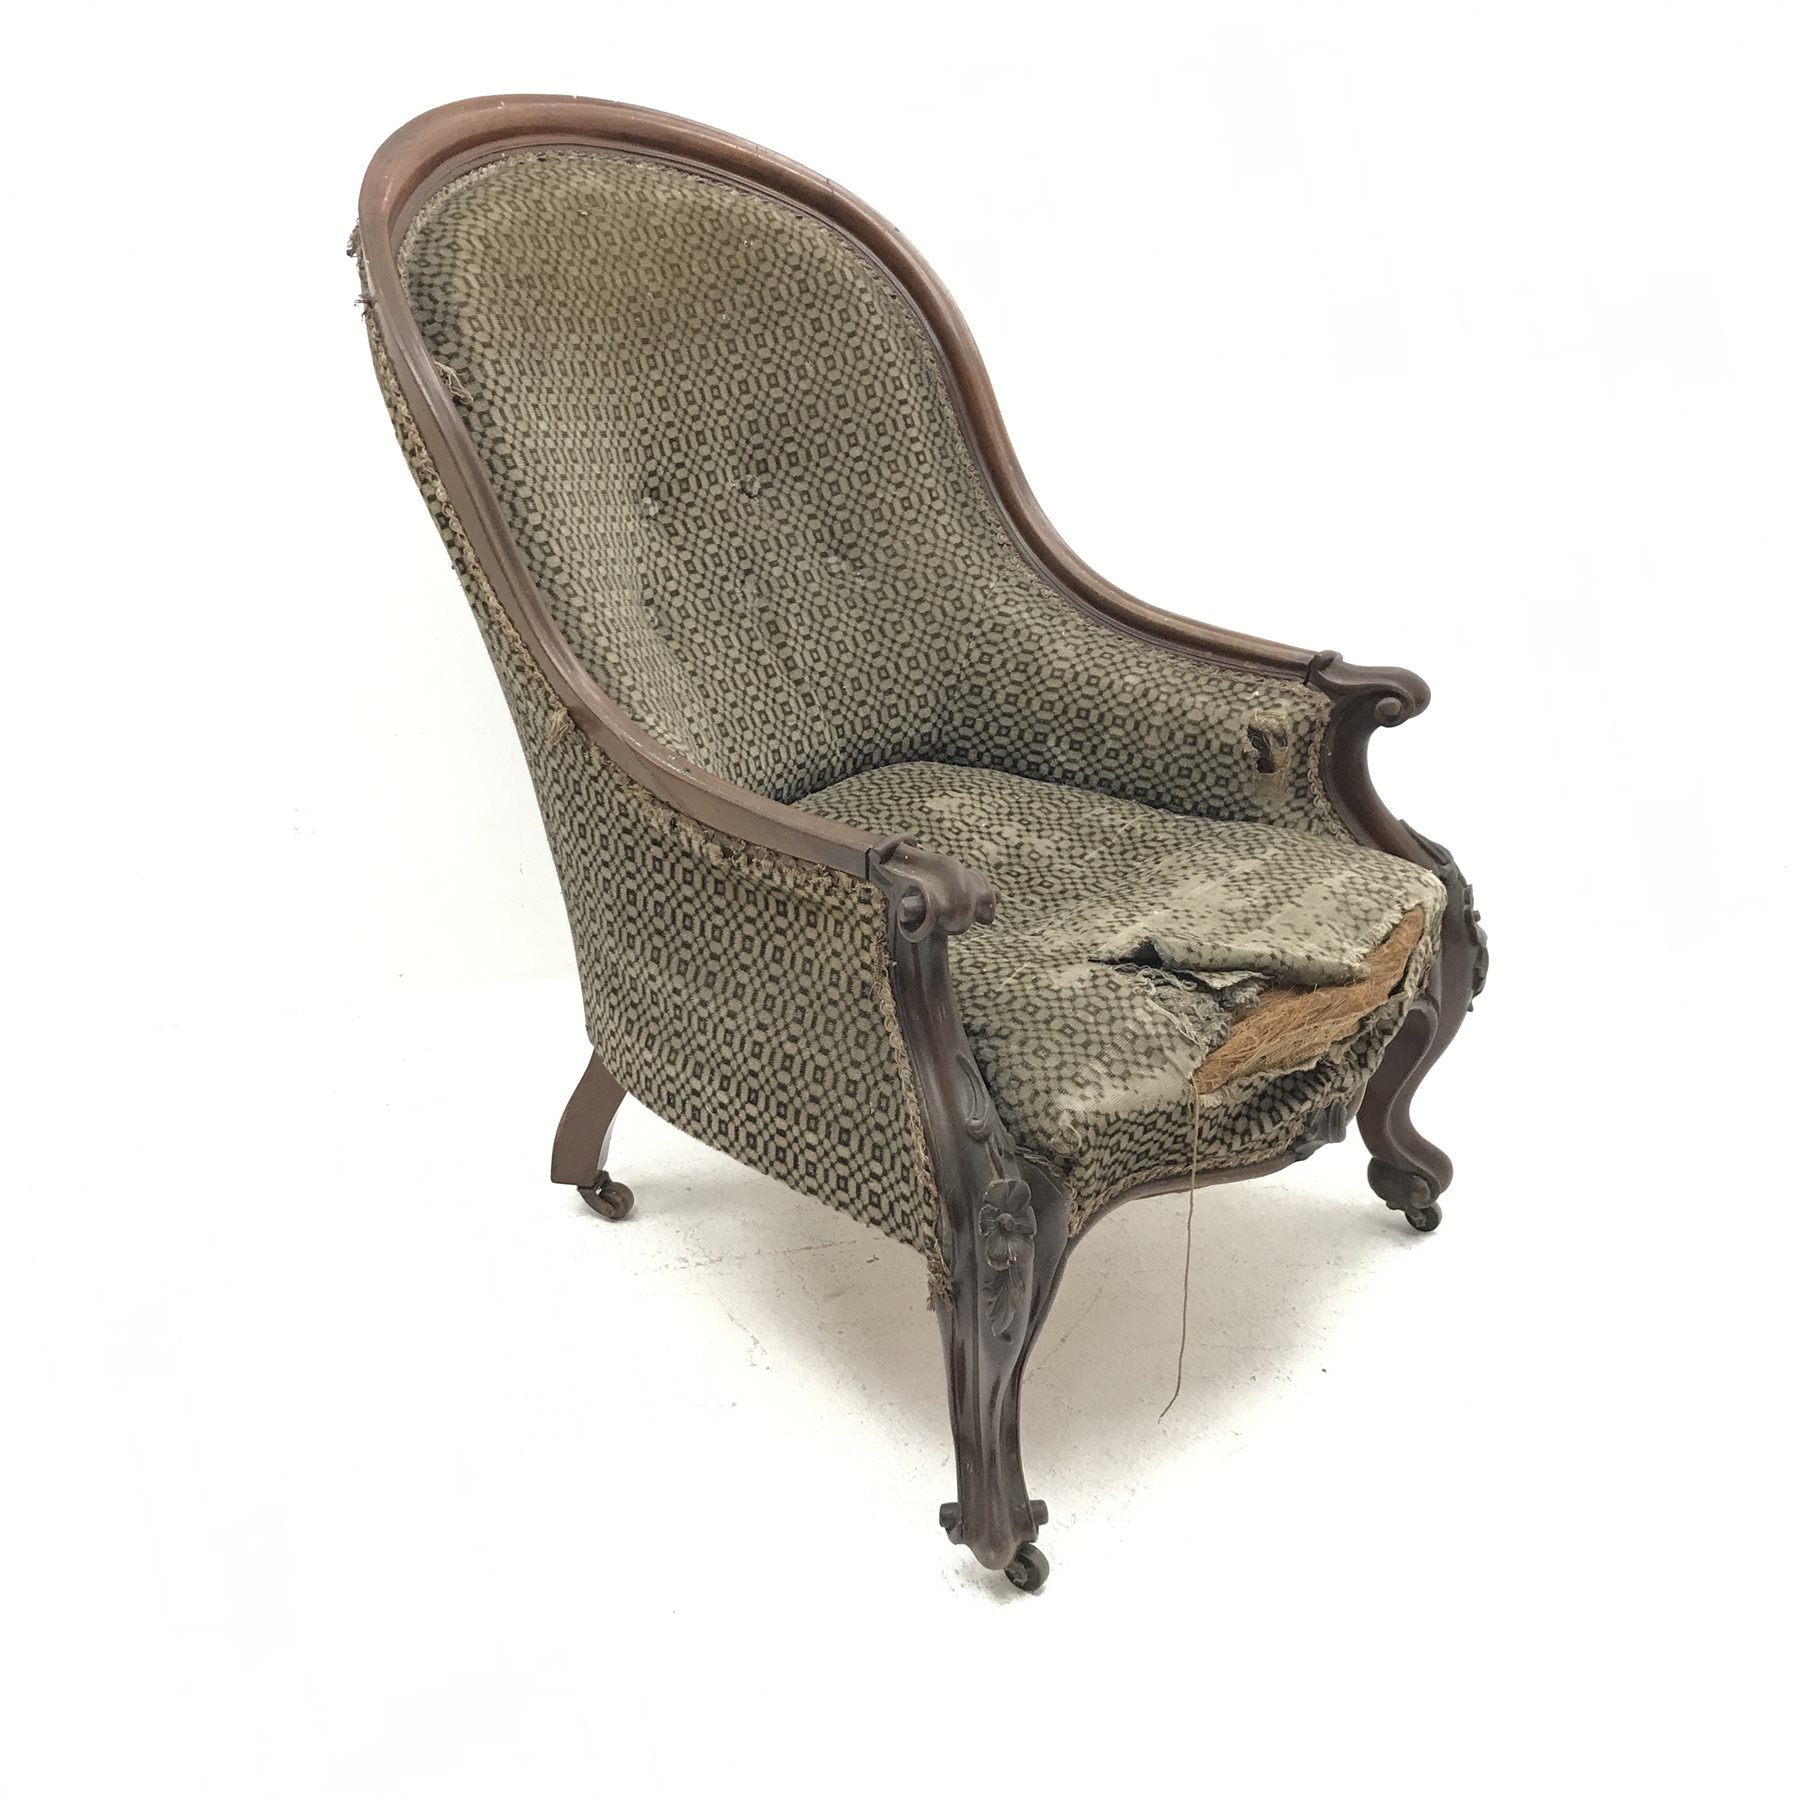 Victorian mahogany framed spoon back armchair, upholstered in a beige ground fabric, floral carved c